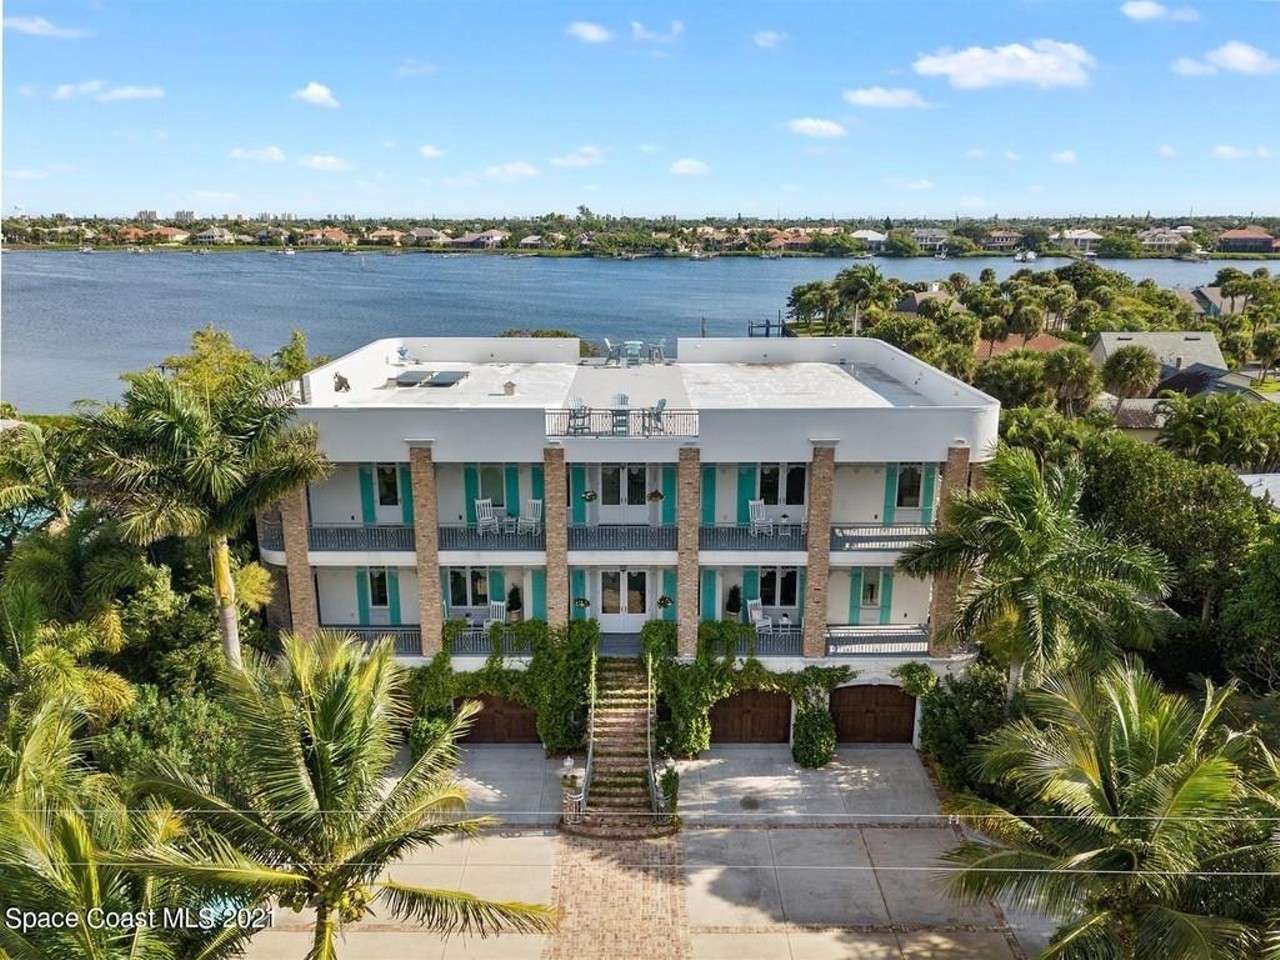 This $5 million Merritt Island home is a mishmosh of French Quarter architecture and Florida opulence